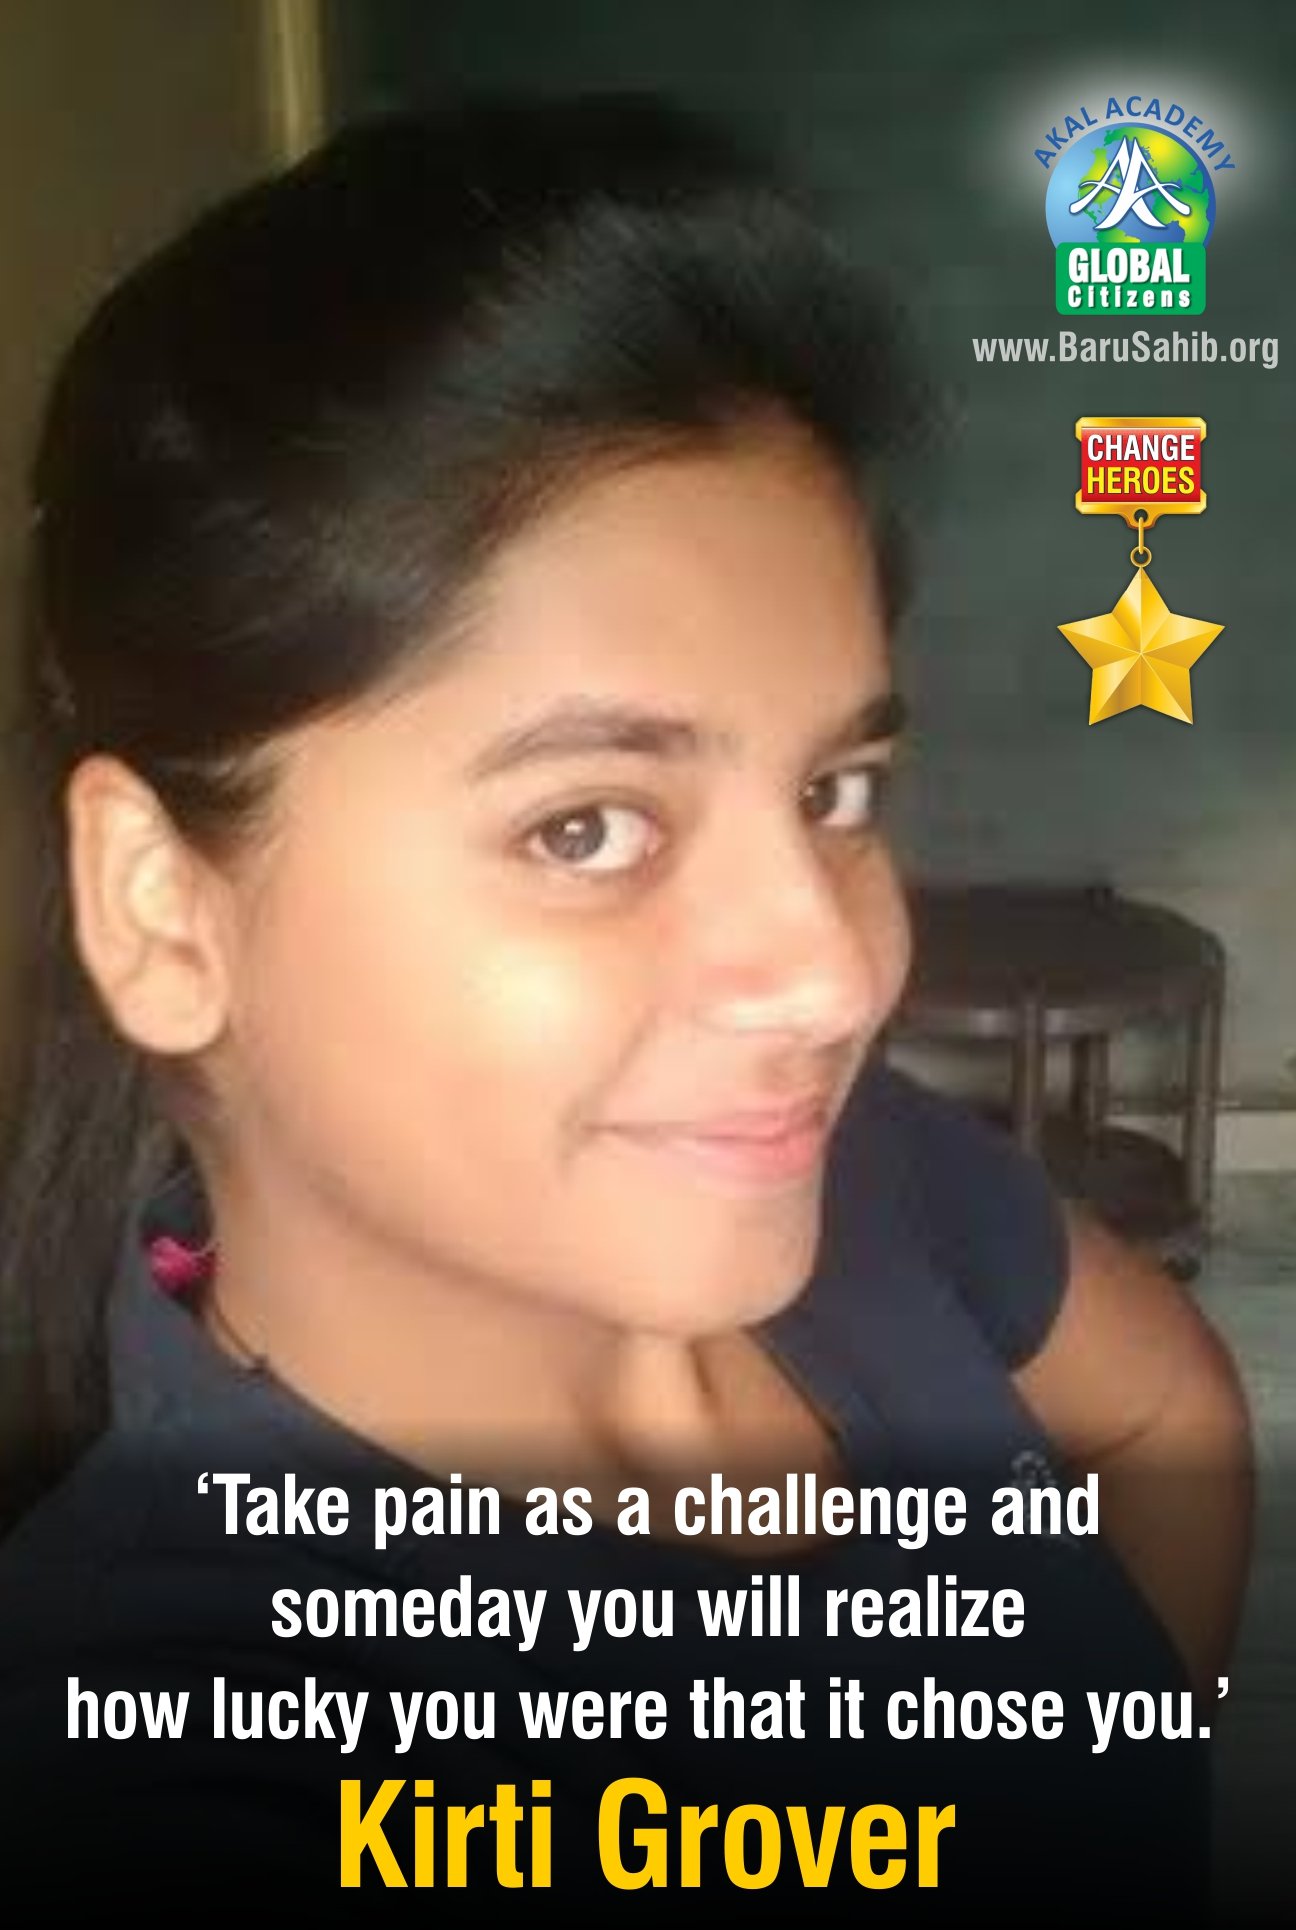 Take-pain-as-a-challenge-and-someday-you-will-realize-how-lucky-you-were-that-it-chose-you.-Kirti-Grover